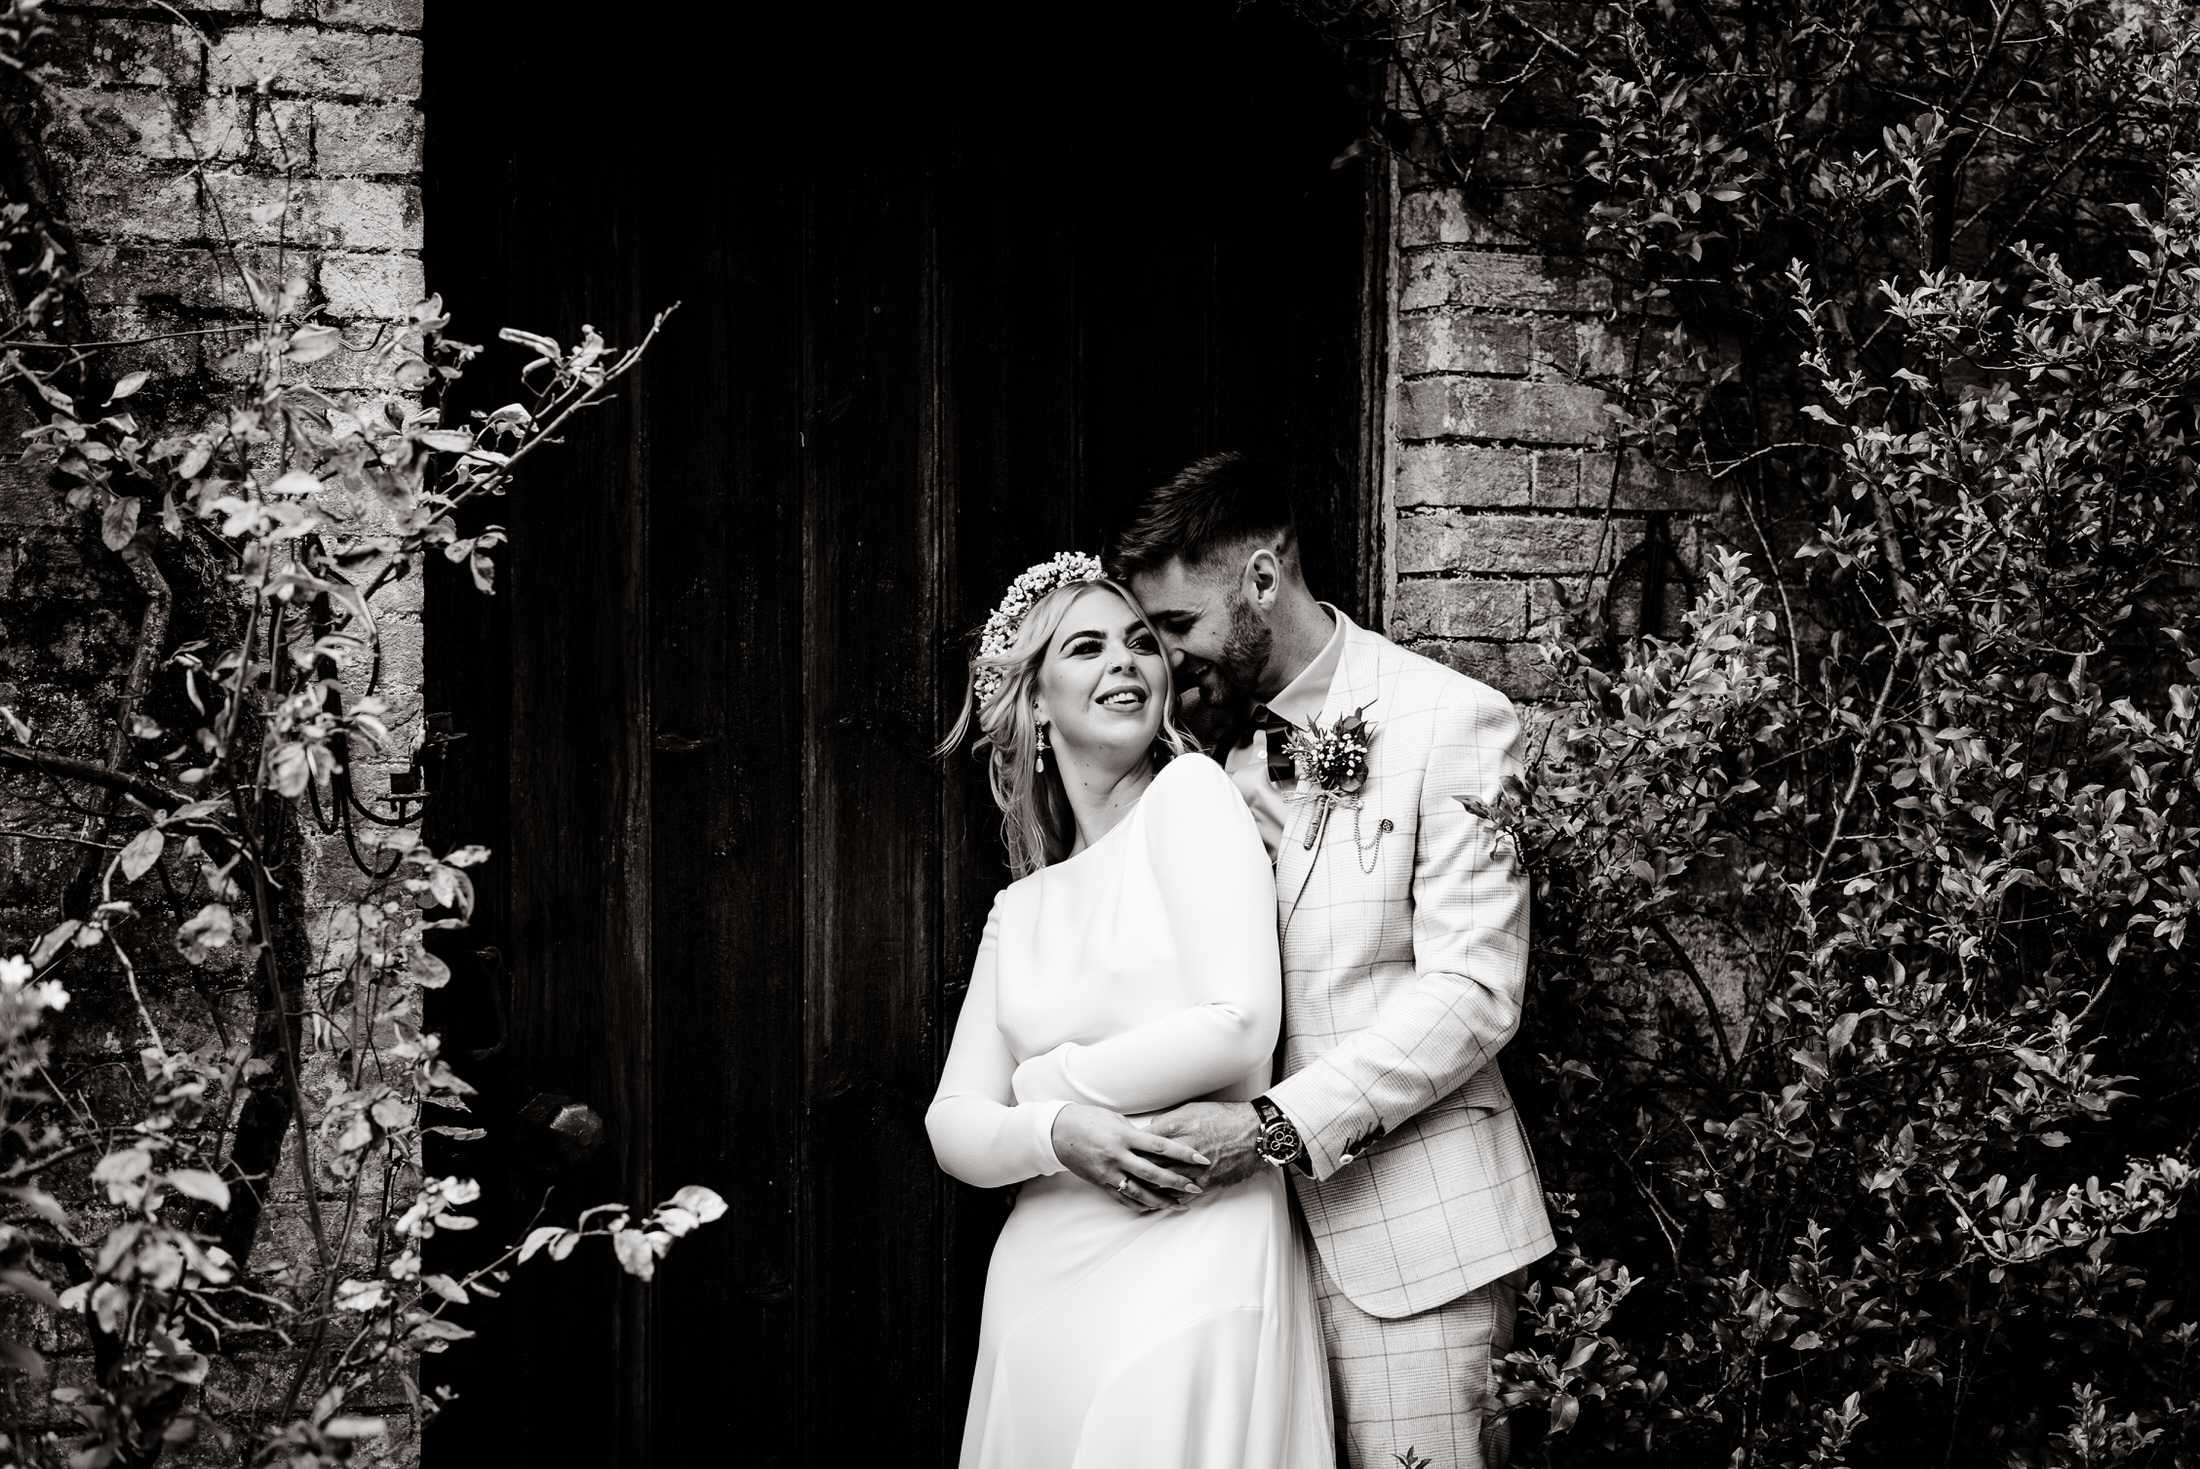 A wedding couple embracing in front of the door at Scrivelsby Walled Garden.